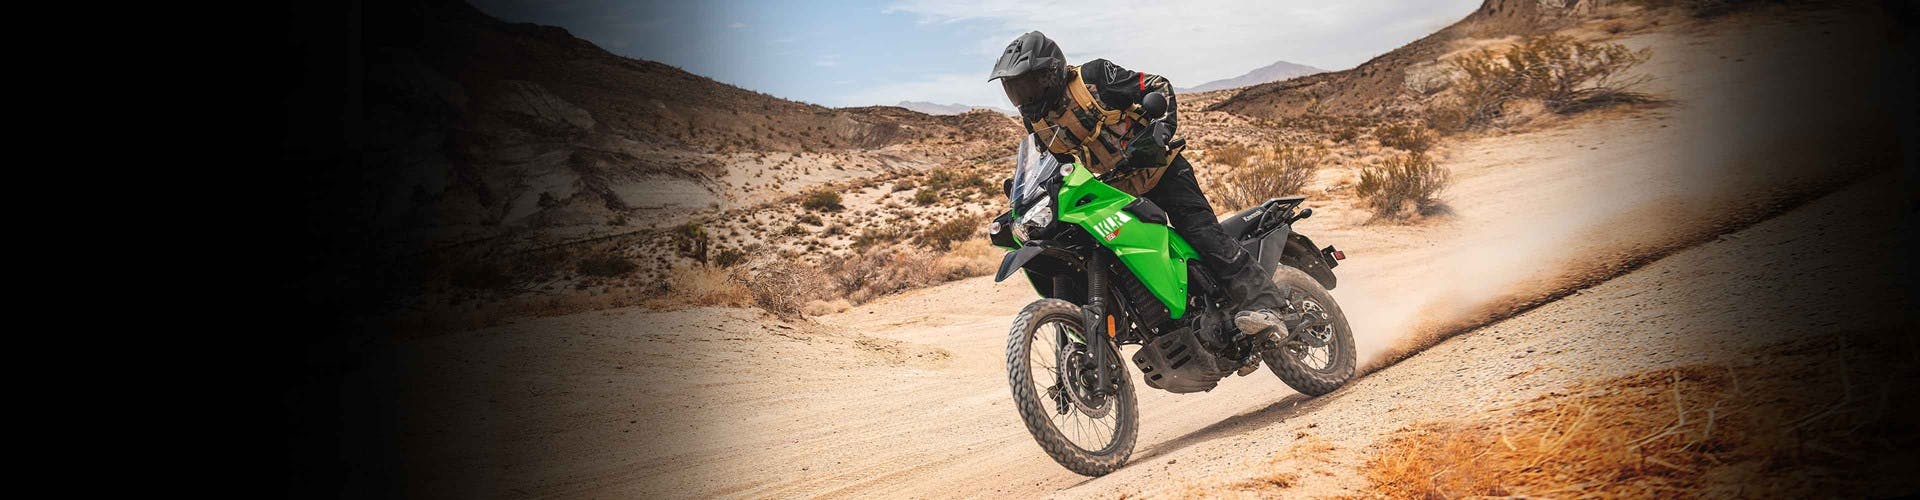 Kawasaki KLR650 in candy lime green colour on off road track